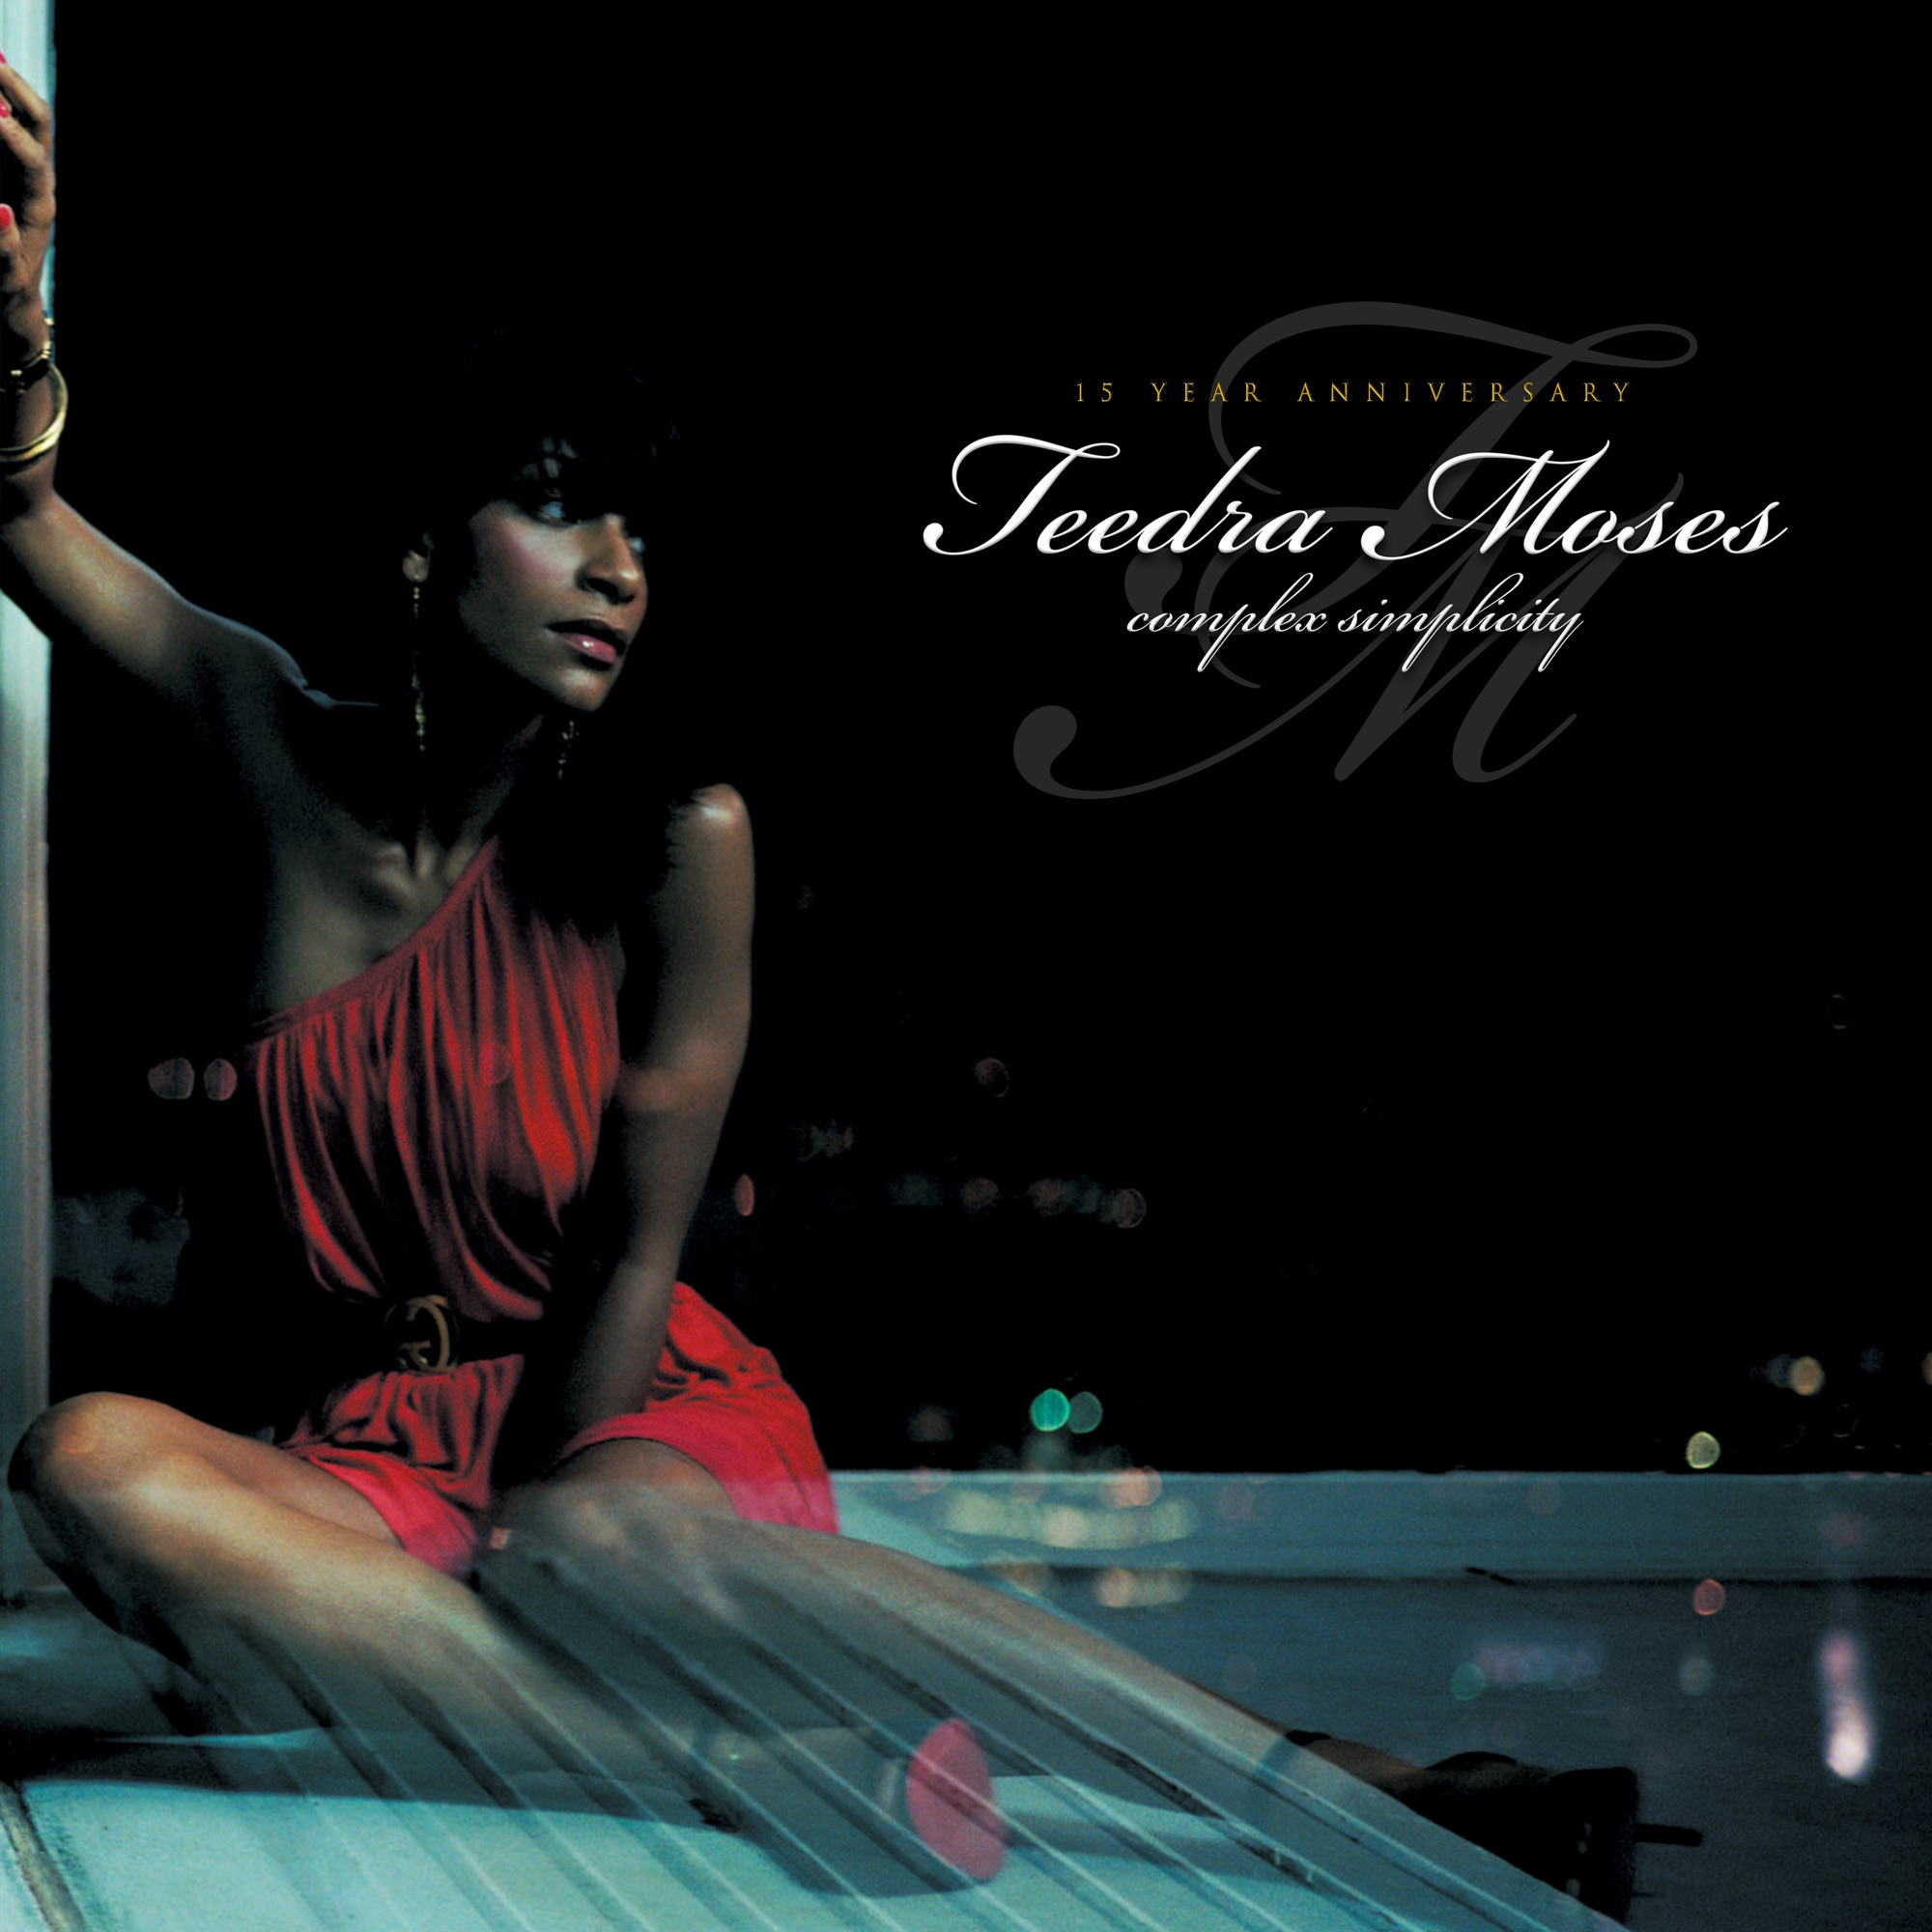 Art for You'll Never Find (a Better Woman) [feat. Jadakiss] by Teedra Moses